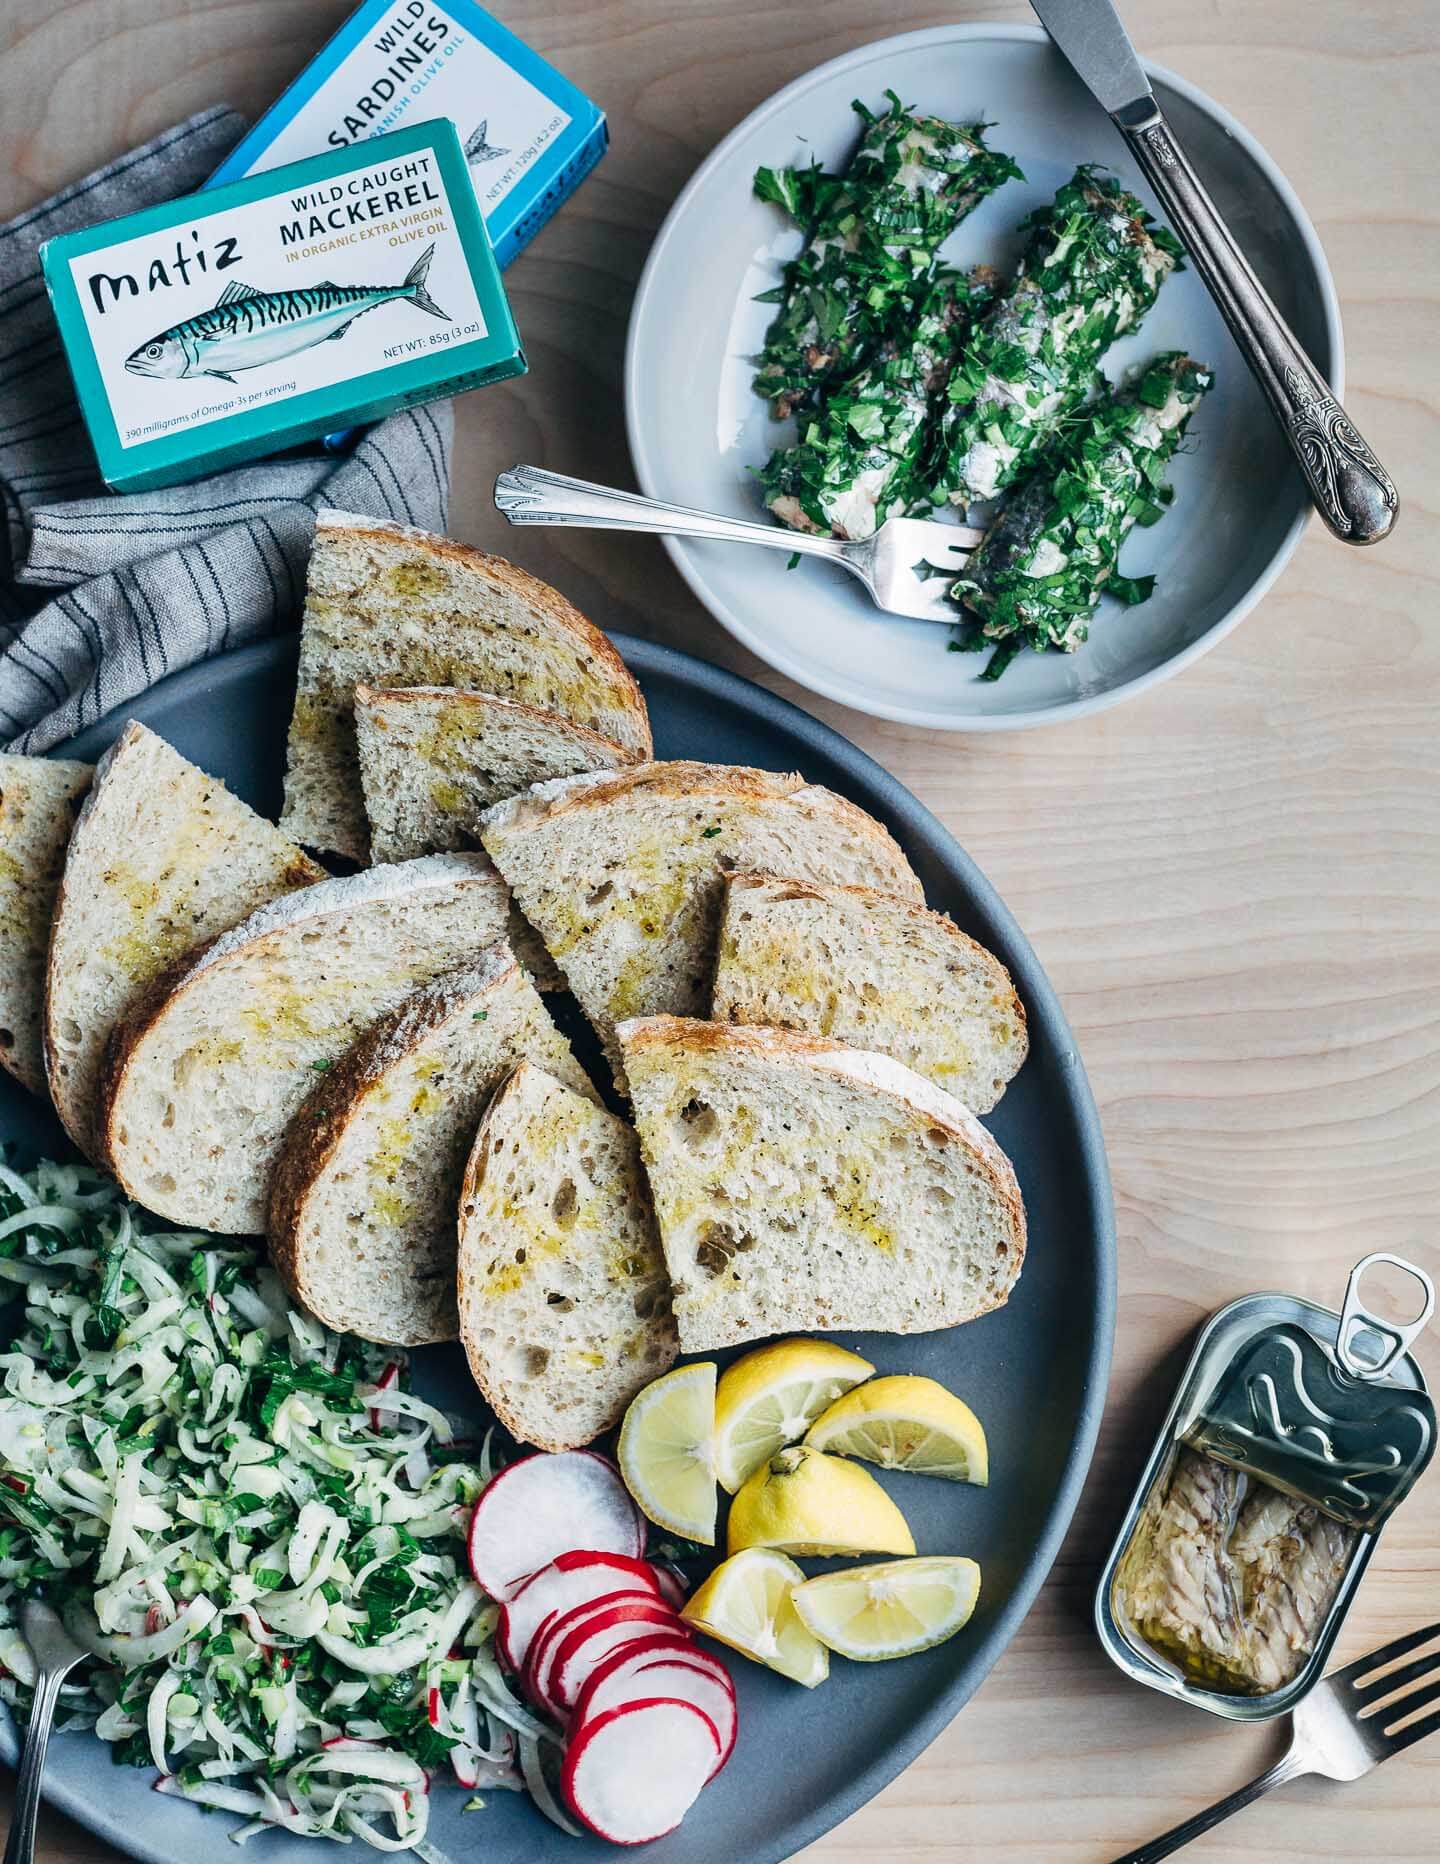 Whether you’re after something simple or celebratory, sourdough toasts with herbed sardines and a shaved fennel salad are the height of easy decadence. Featuring Matiz tinned wild sardines, this meal comes together in minutes.